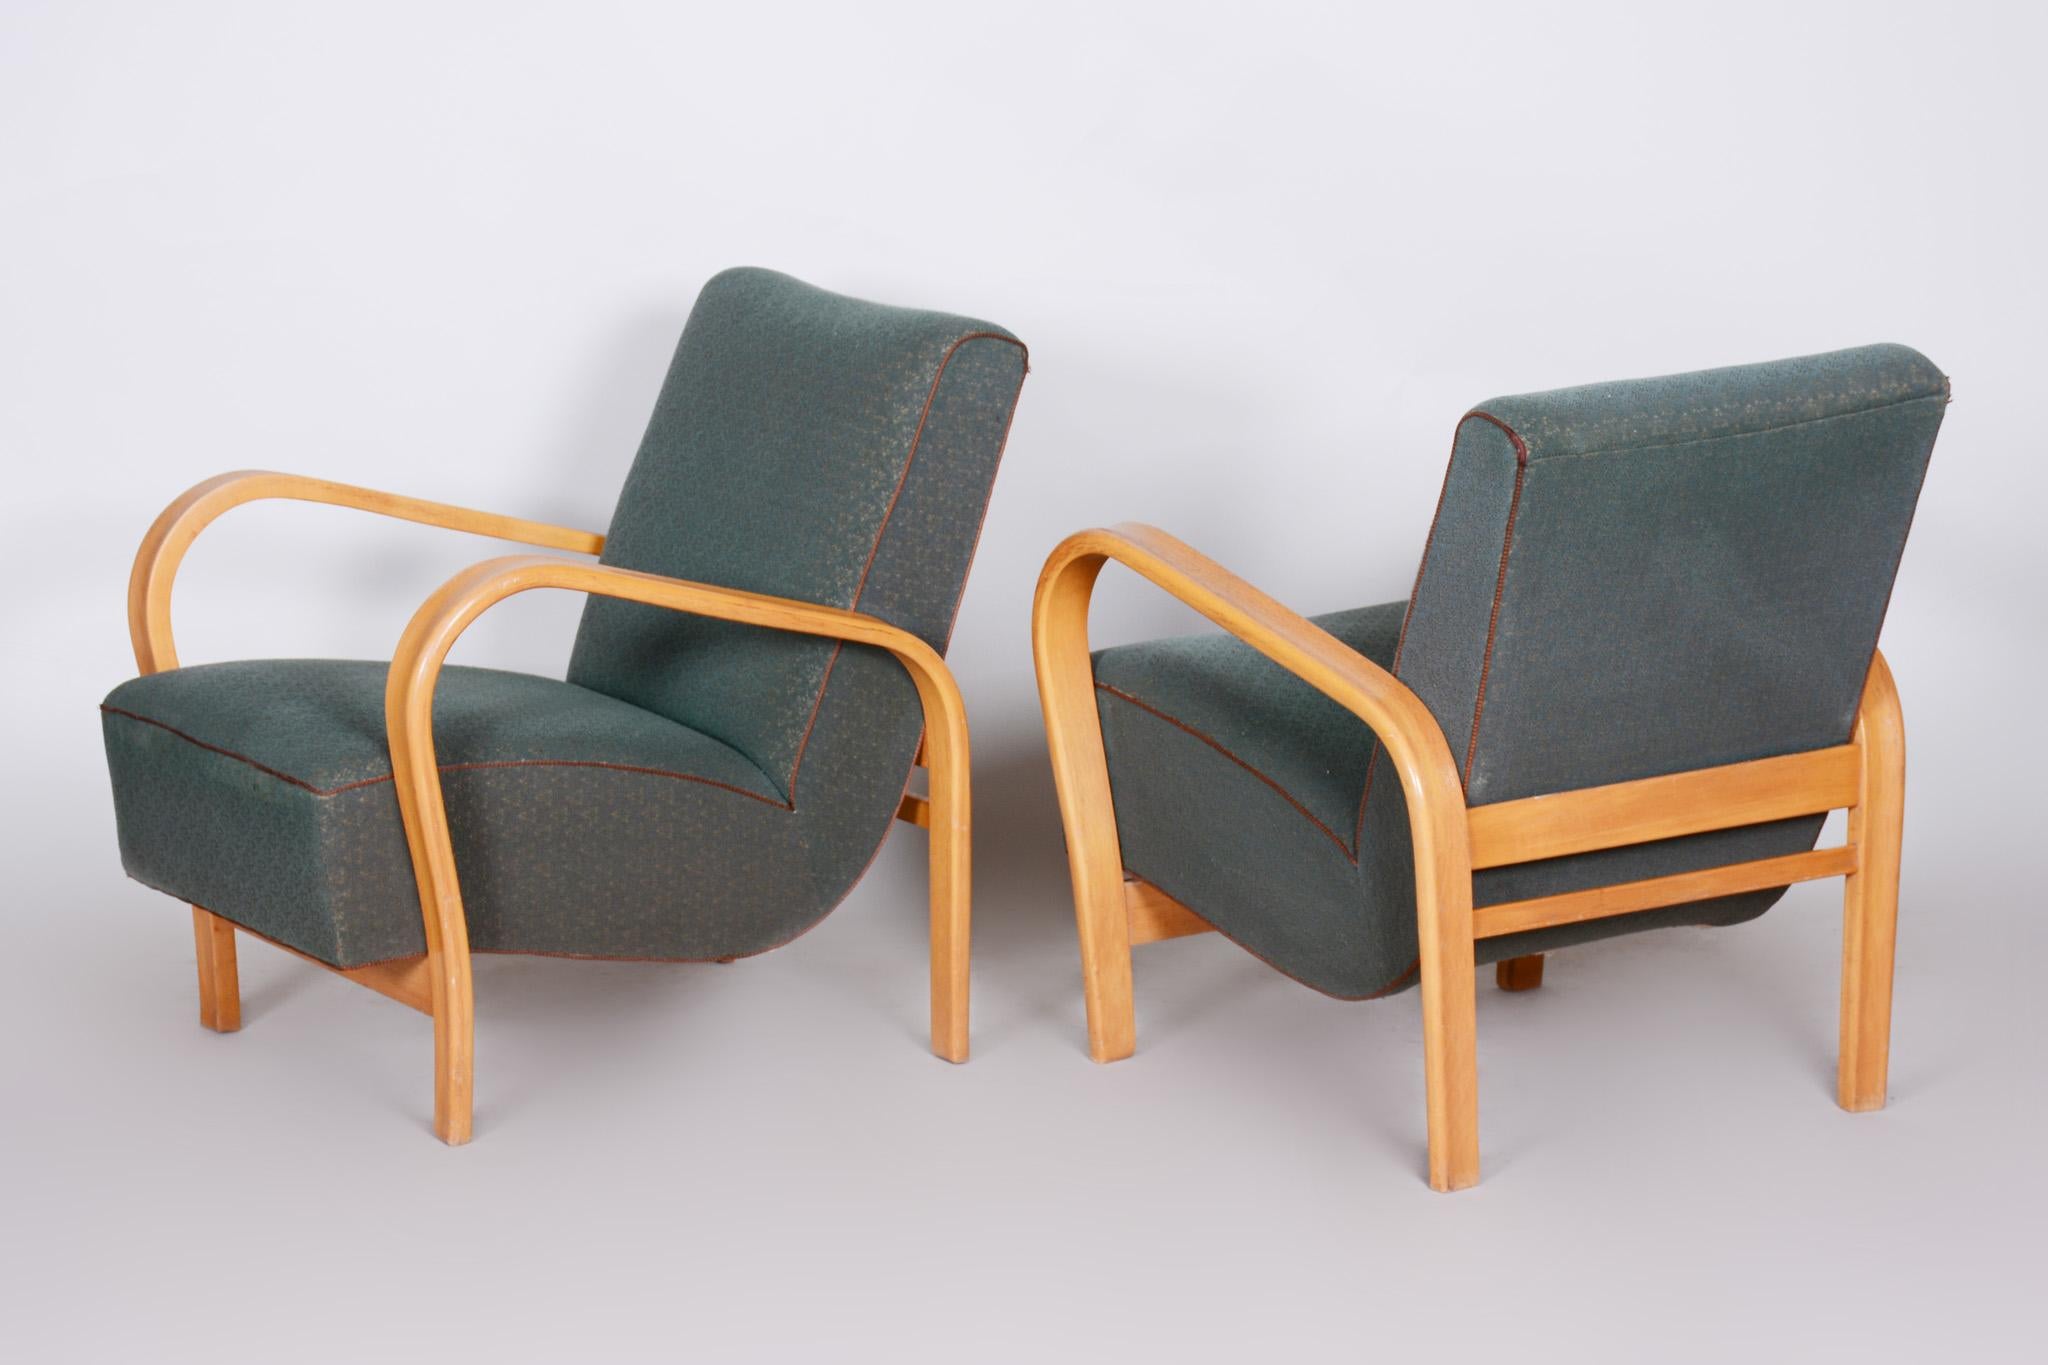 Mid century armchairs.
Original well preserved condition.
Material: Oak and beech
Source: Czech
Period: 1930-1939.